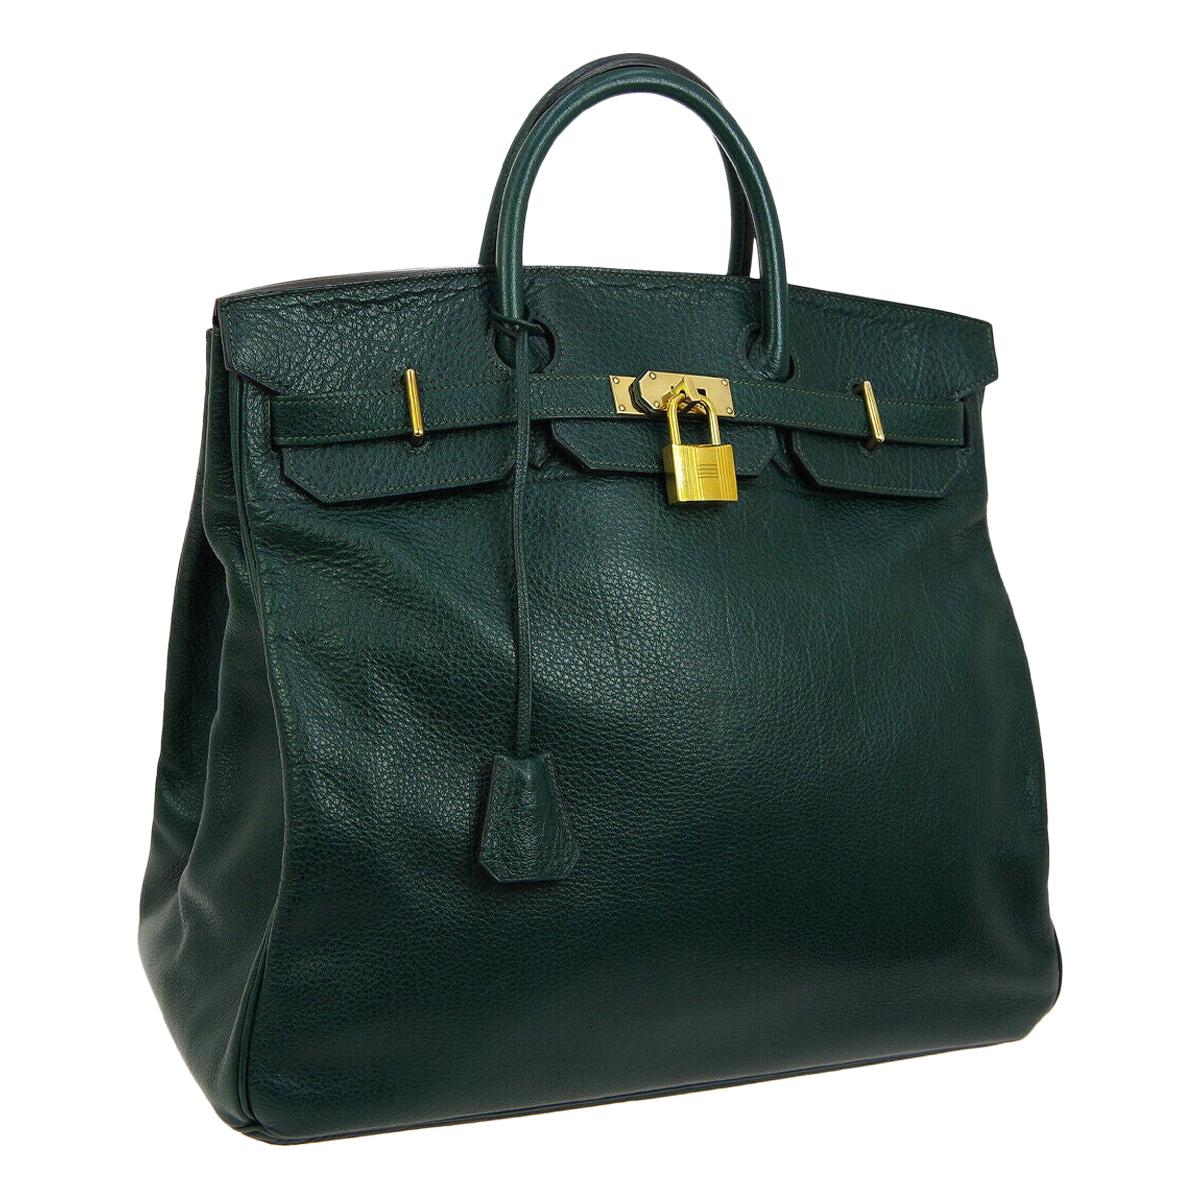 Hermes HAC 45 Green Leather Gold Large Men's Carryall Travel Top Handle Tote Bag